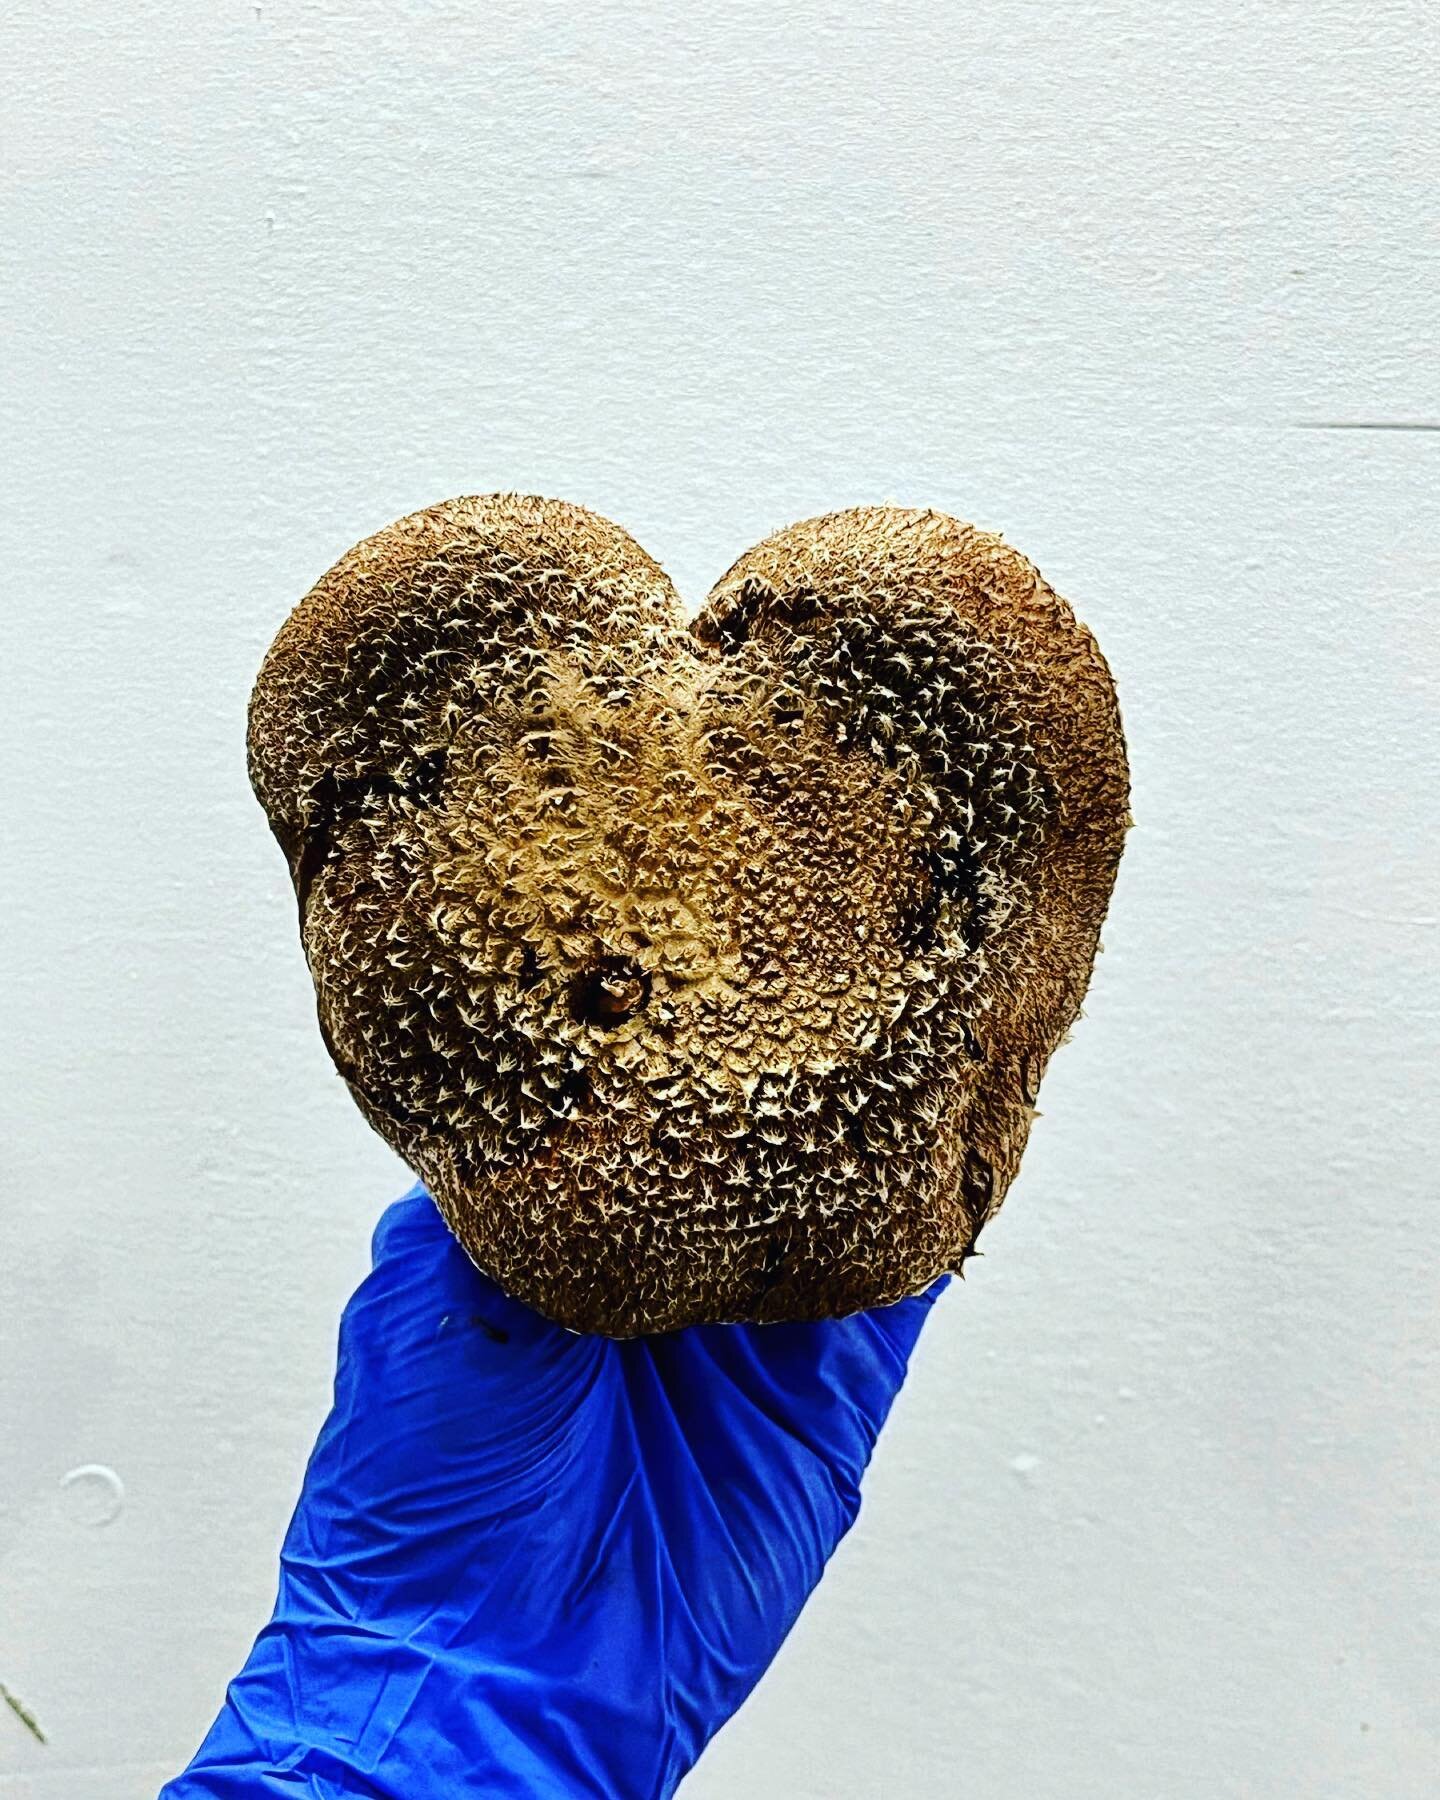 So mushroom in our hearts for you 💕 

Happy Valentines! Honestly- any excuse for a corny mushroom pun. 💕🍄😘